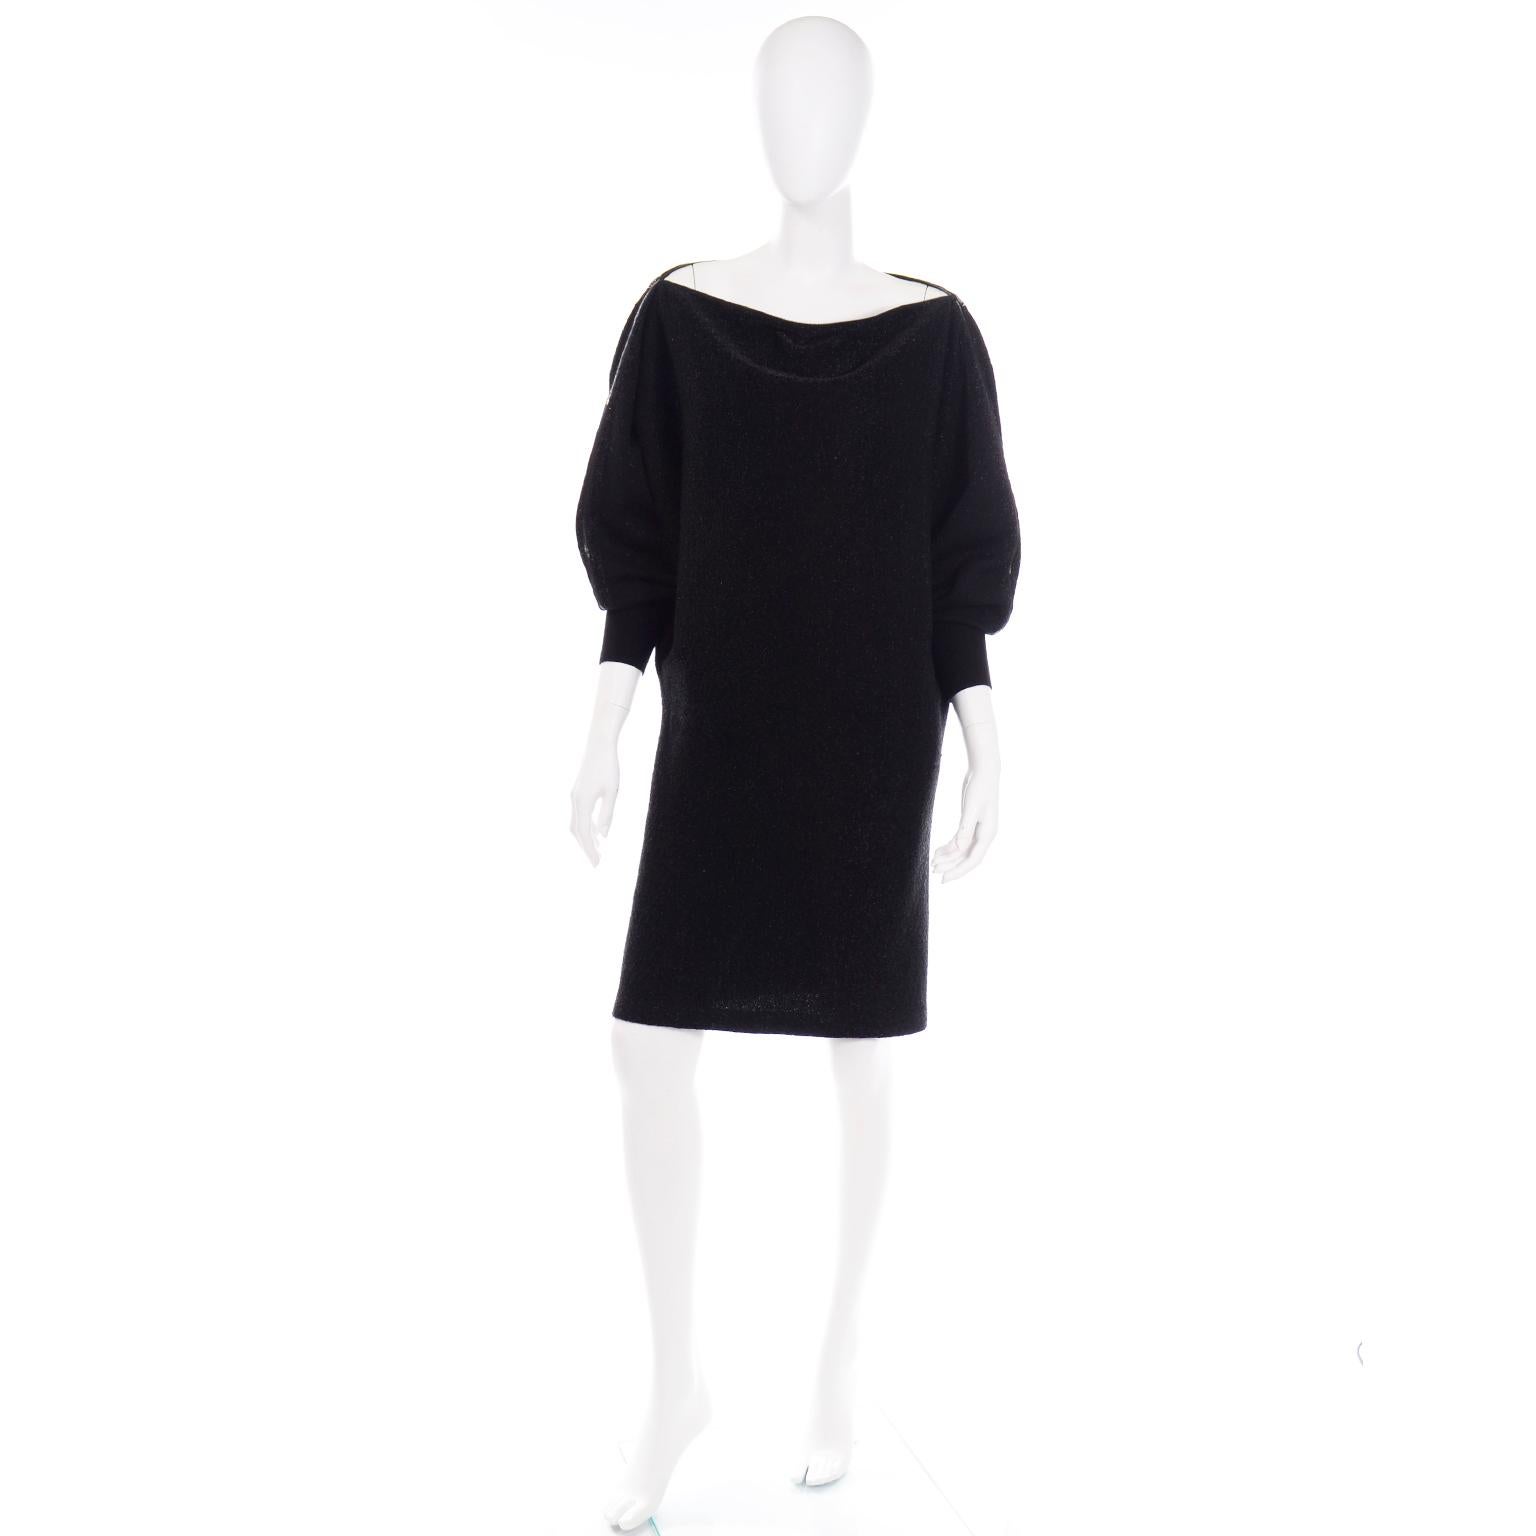 This vintage Jean Paul Gaultier black sparkle knit dress has a metal zipper that starts at the base of the cuffs and wraps around the arms, shoulders, and neck opening. The neckline is completely adjustable with the zippers. The sparkle starts to